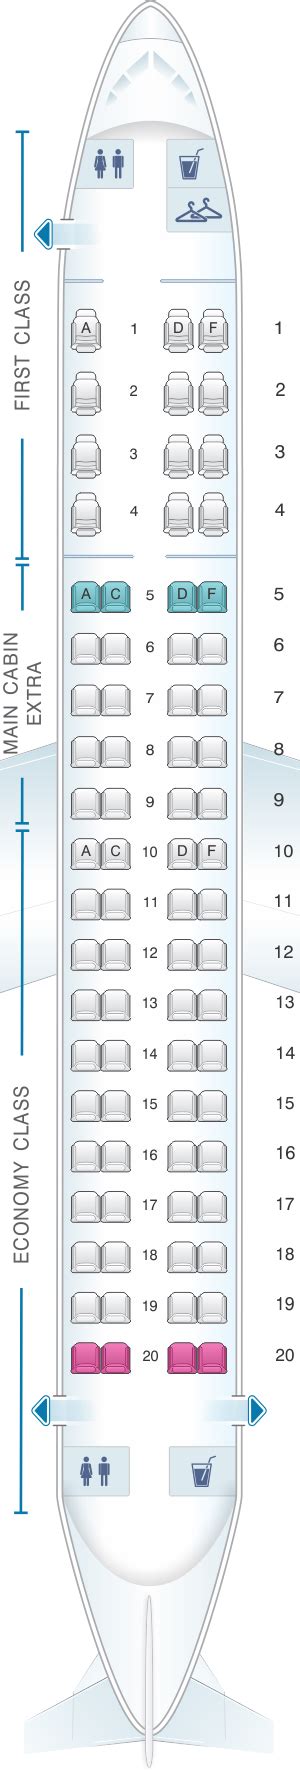 Detailed seat map American Airlines Boeing B777 300ER. Find the best airplanes seats, information on legroom, recline and in-flight entertainment using our detailed online seating charts. ... Embraer ERJ 175 V1; Embraer ERJ 175 V2; Embraer ERJ 190; McDonnell Douglas MD 80; View all. Recent Travel Tips. Hotel Panviman Koh Phangan - A treasure .... 